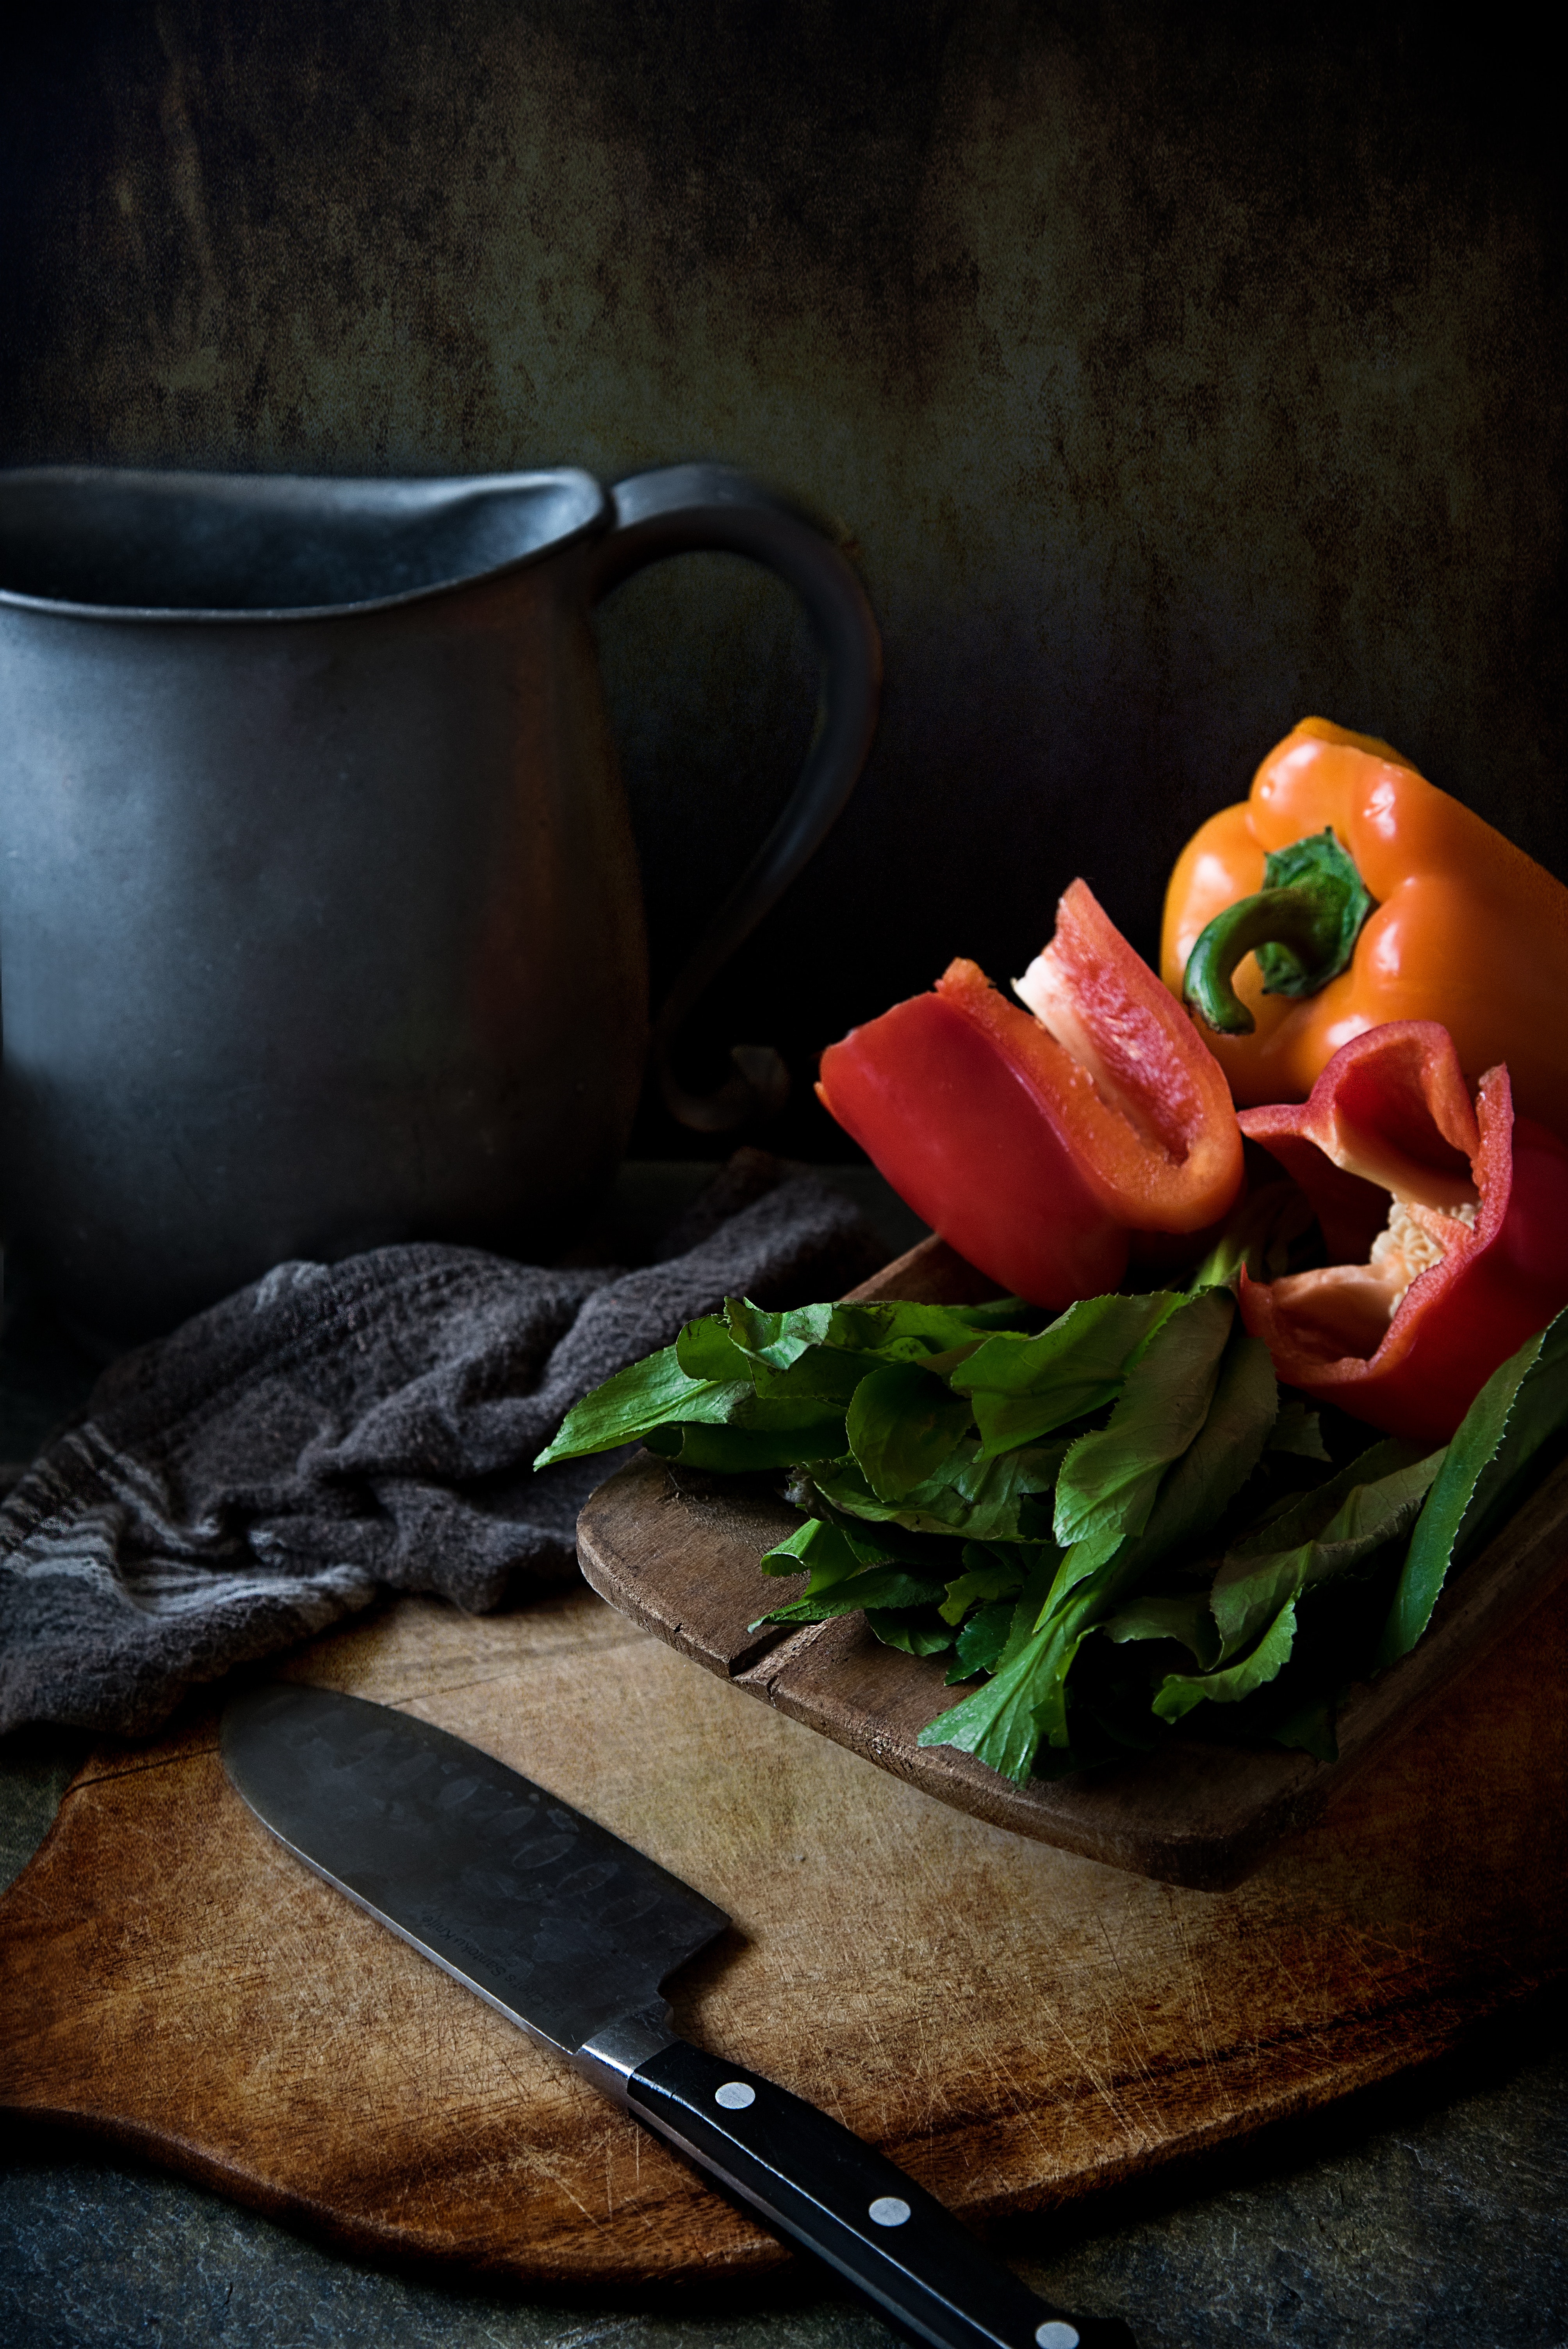 Sliced Bell Peppers, Board, Pitcher, Wood, Vegetarian, HQ Photo